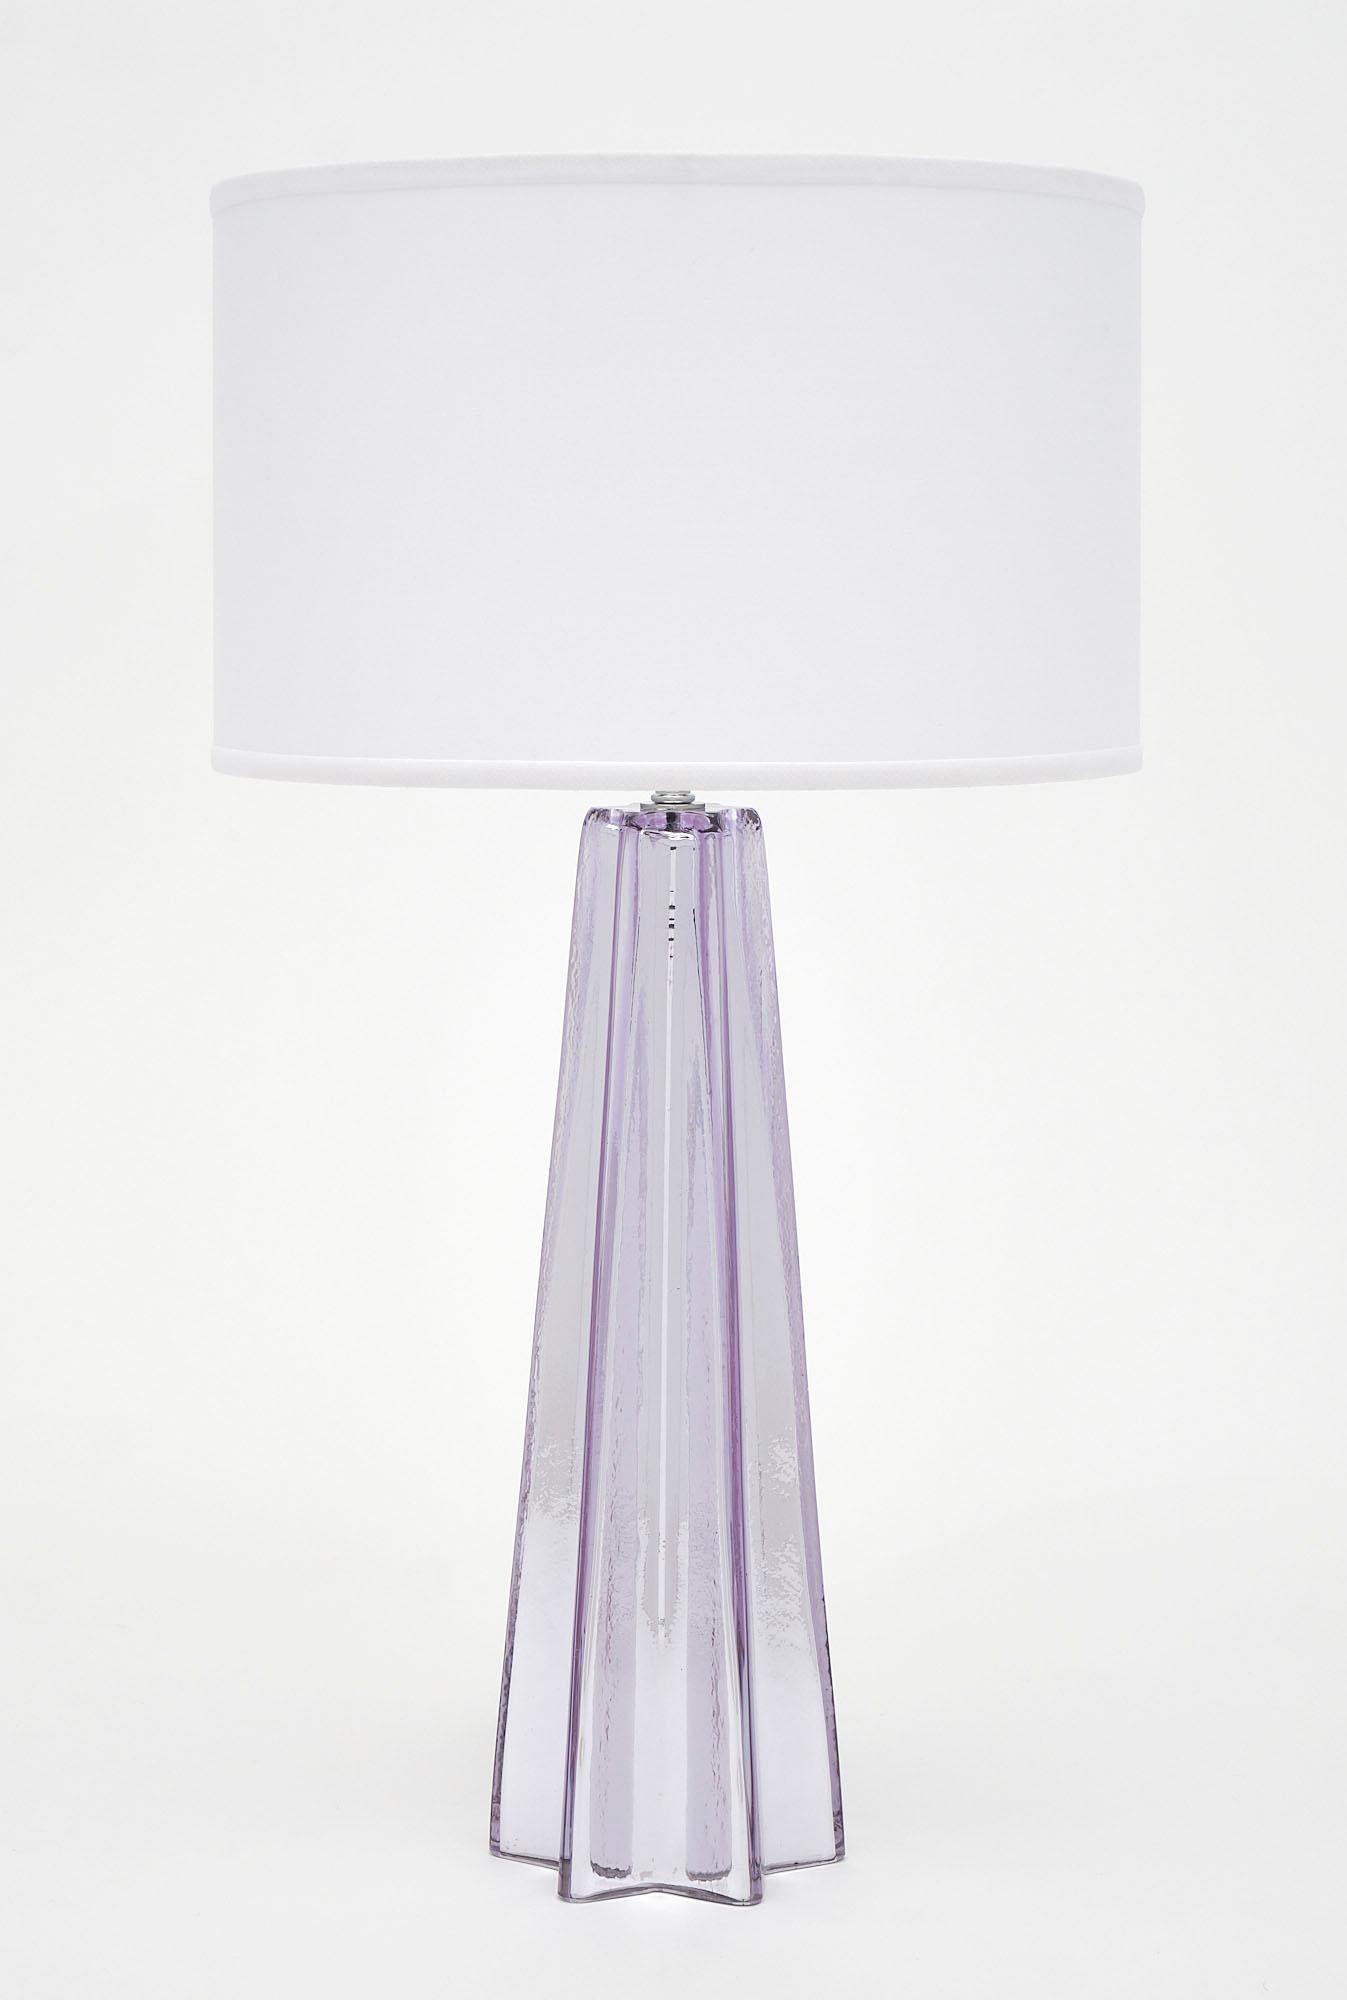 A sparkling pair of hand-blown Murano glass table lamps with a beautiful amethyst tone. Mercury leafing overlaid with thick, amethyst glass. The height to the top of the glass is 18.5”. Newly wired to US standards.